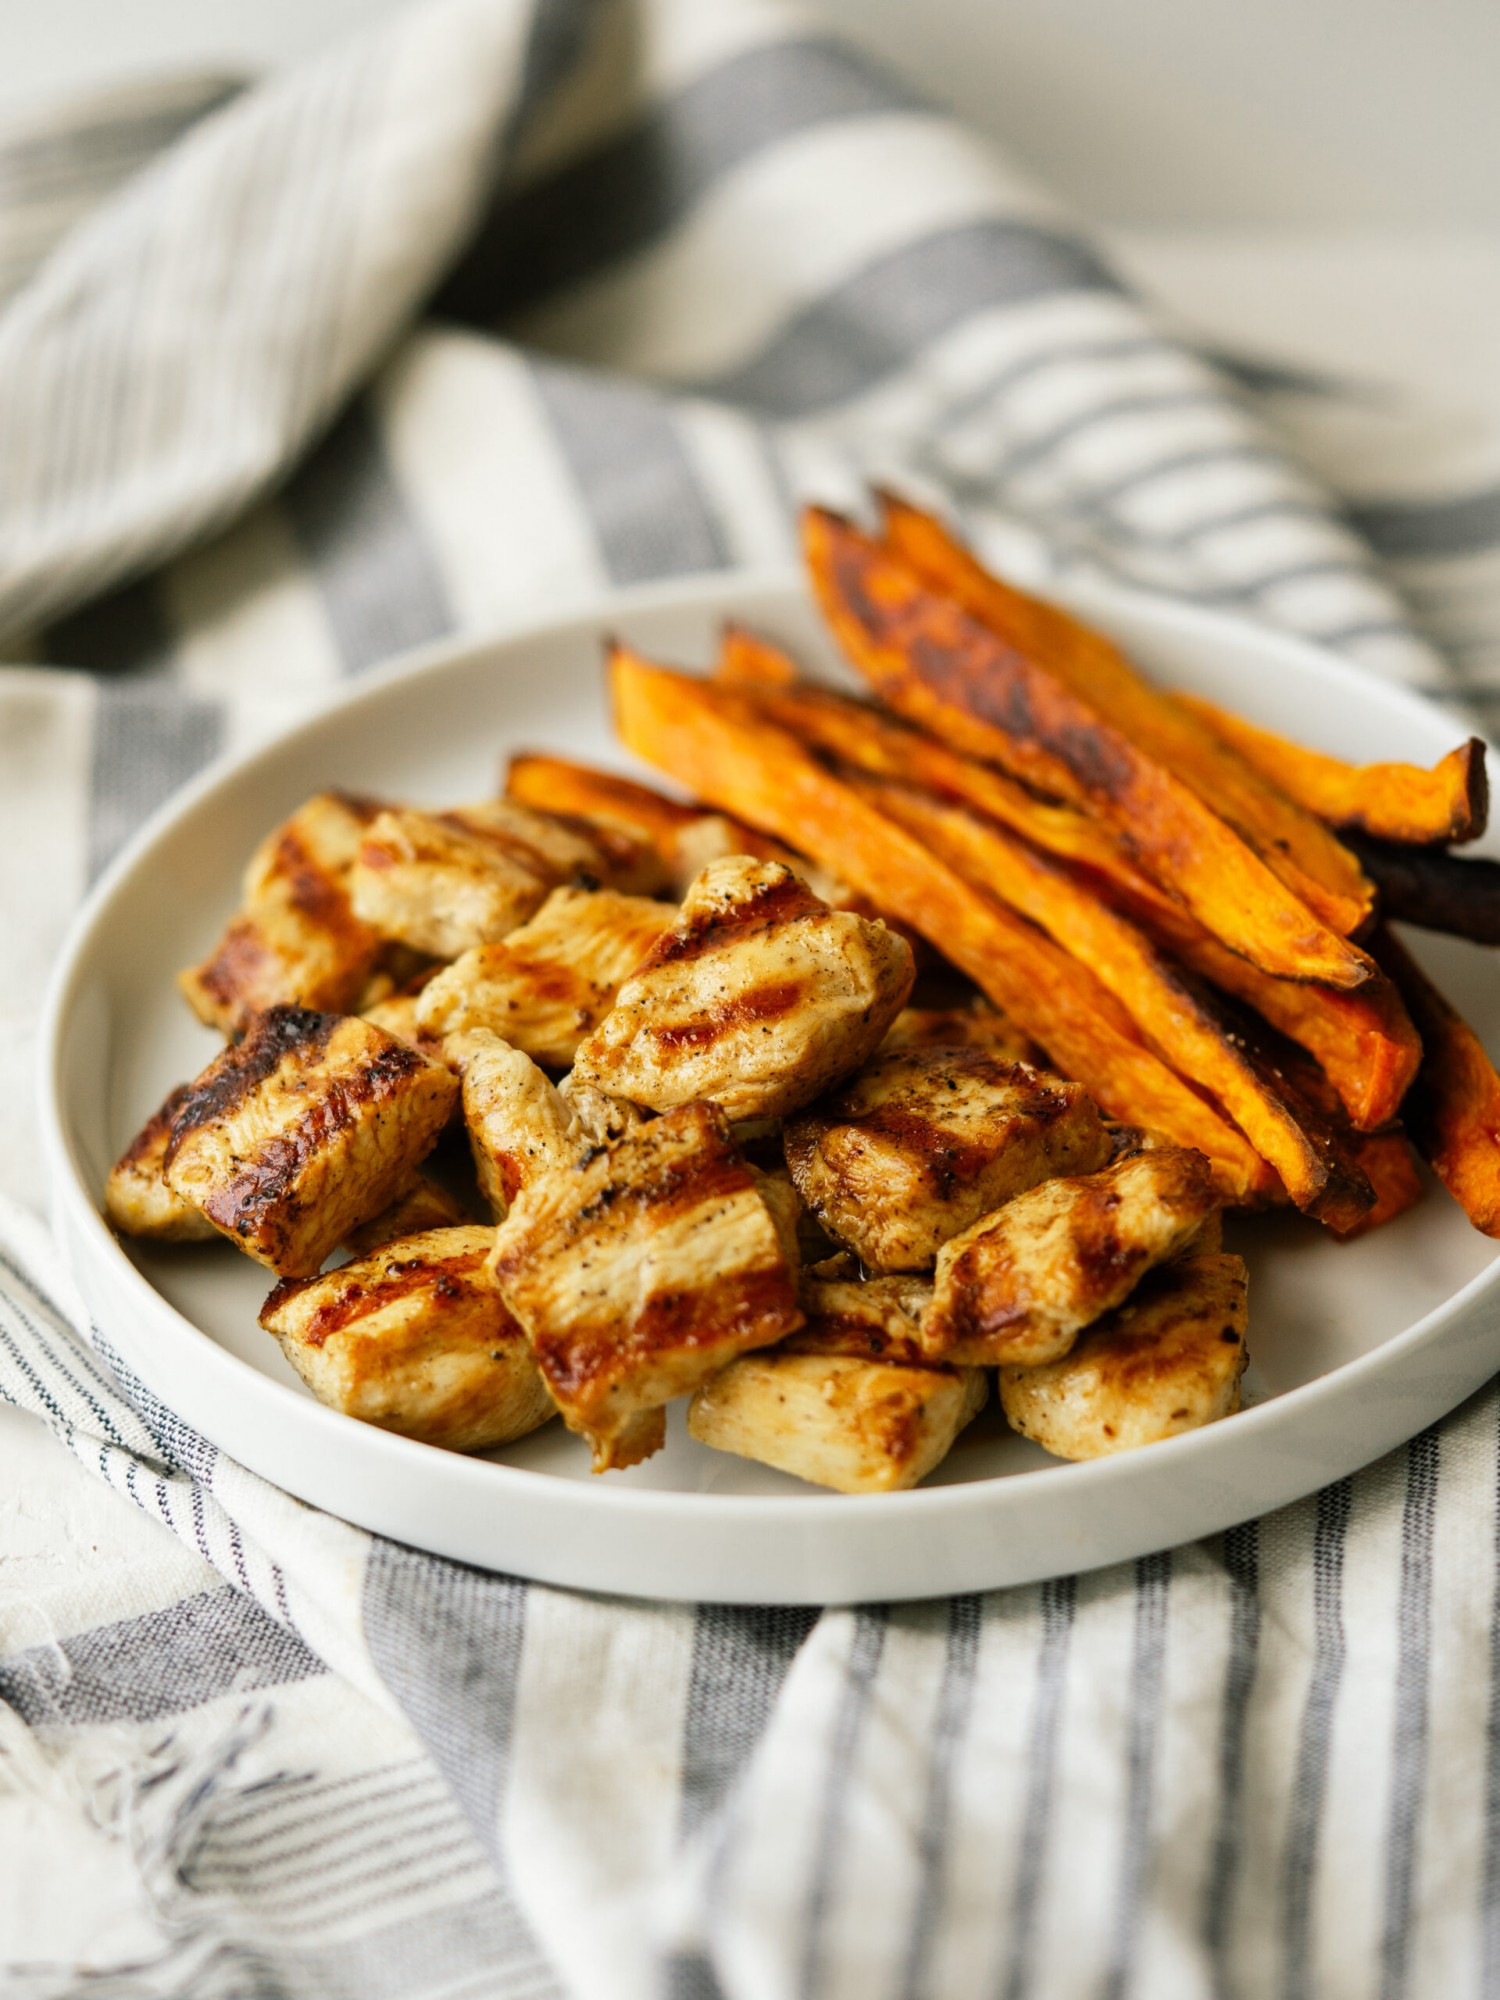 a three quarter view photo of grilled chicken nuggets on a plate with sweet potato fries